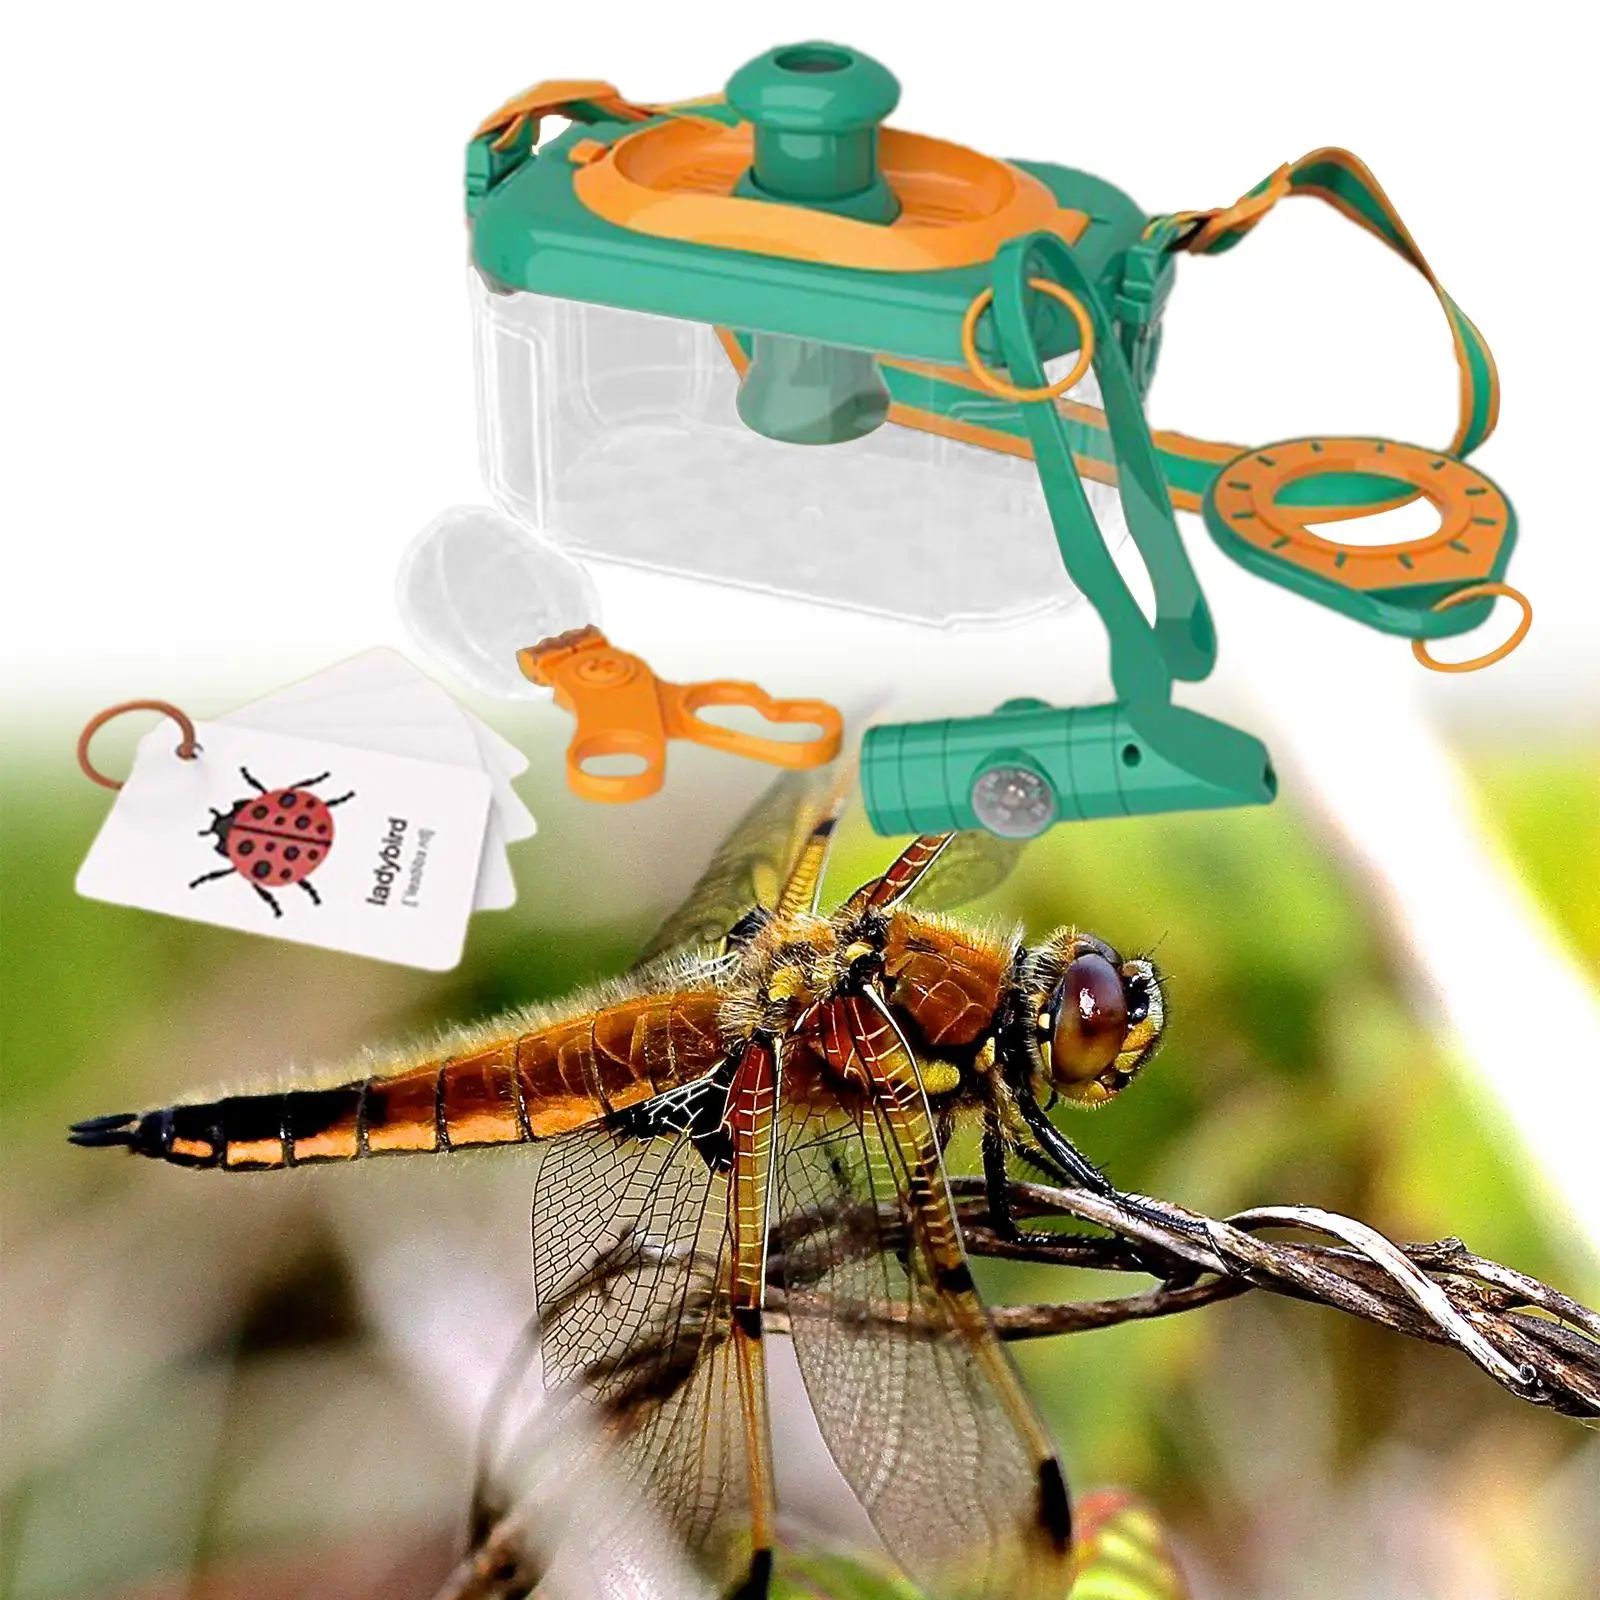 Portable Explorer Kit Educational Learning Toy Insect Observation Container Bugs Collection Kit for Kids Toddlers